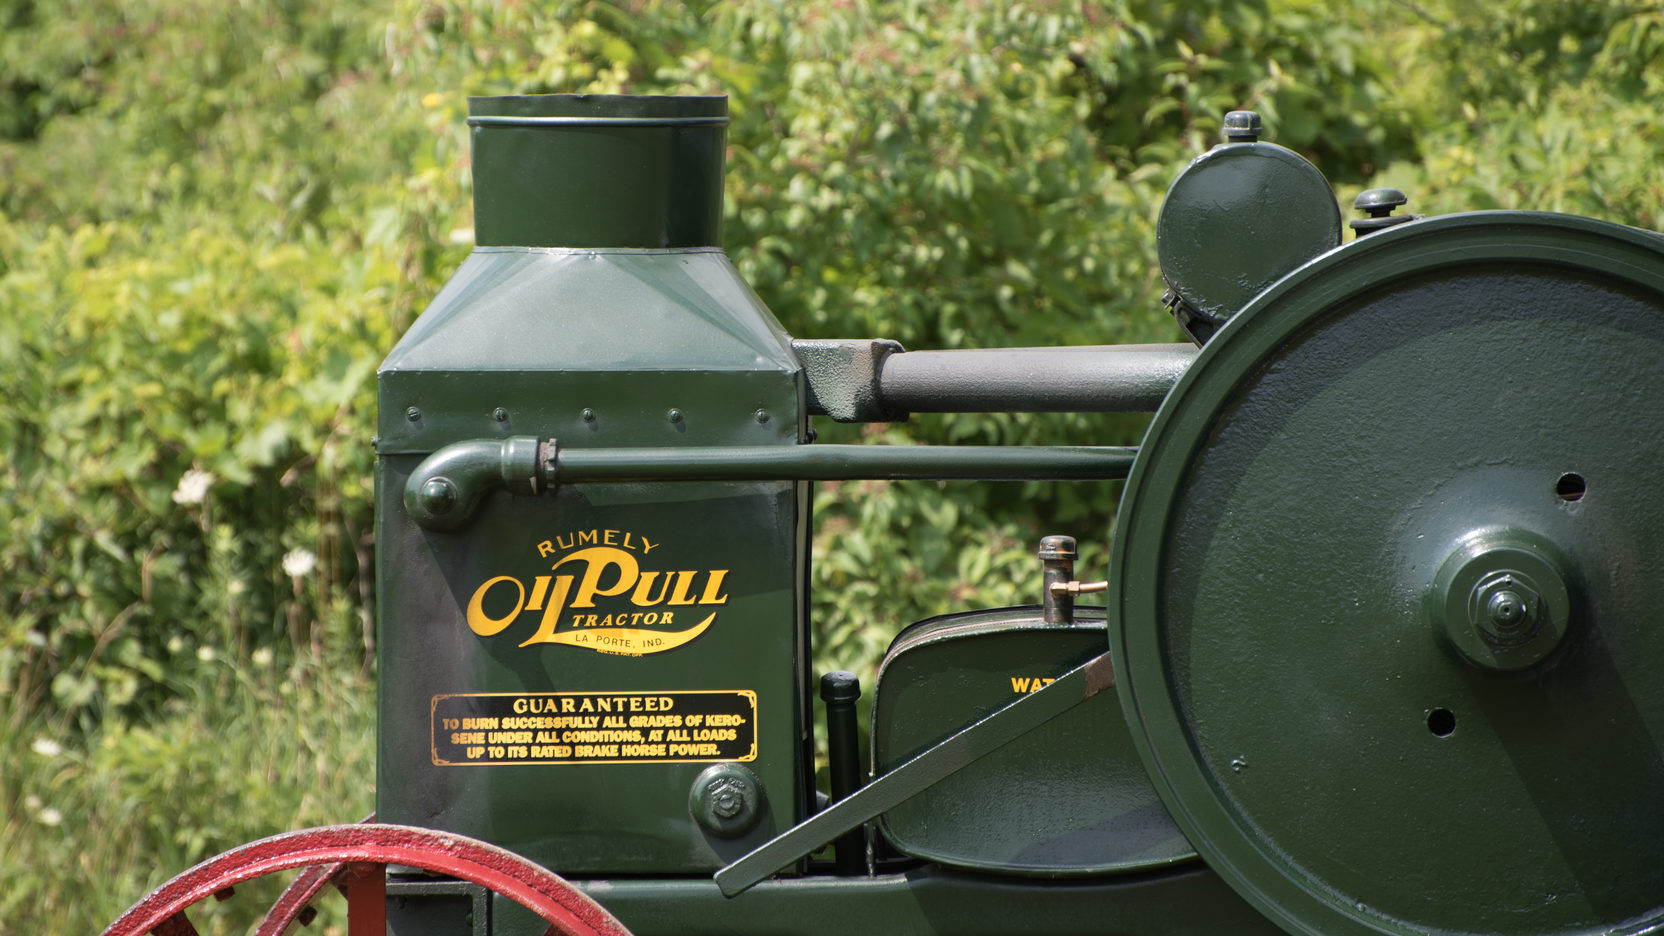 The Rumely Oil Pull traction engine was designed to run on cheap kerosene of any grade.